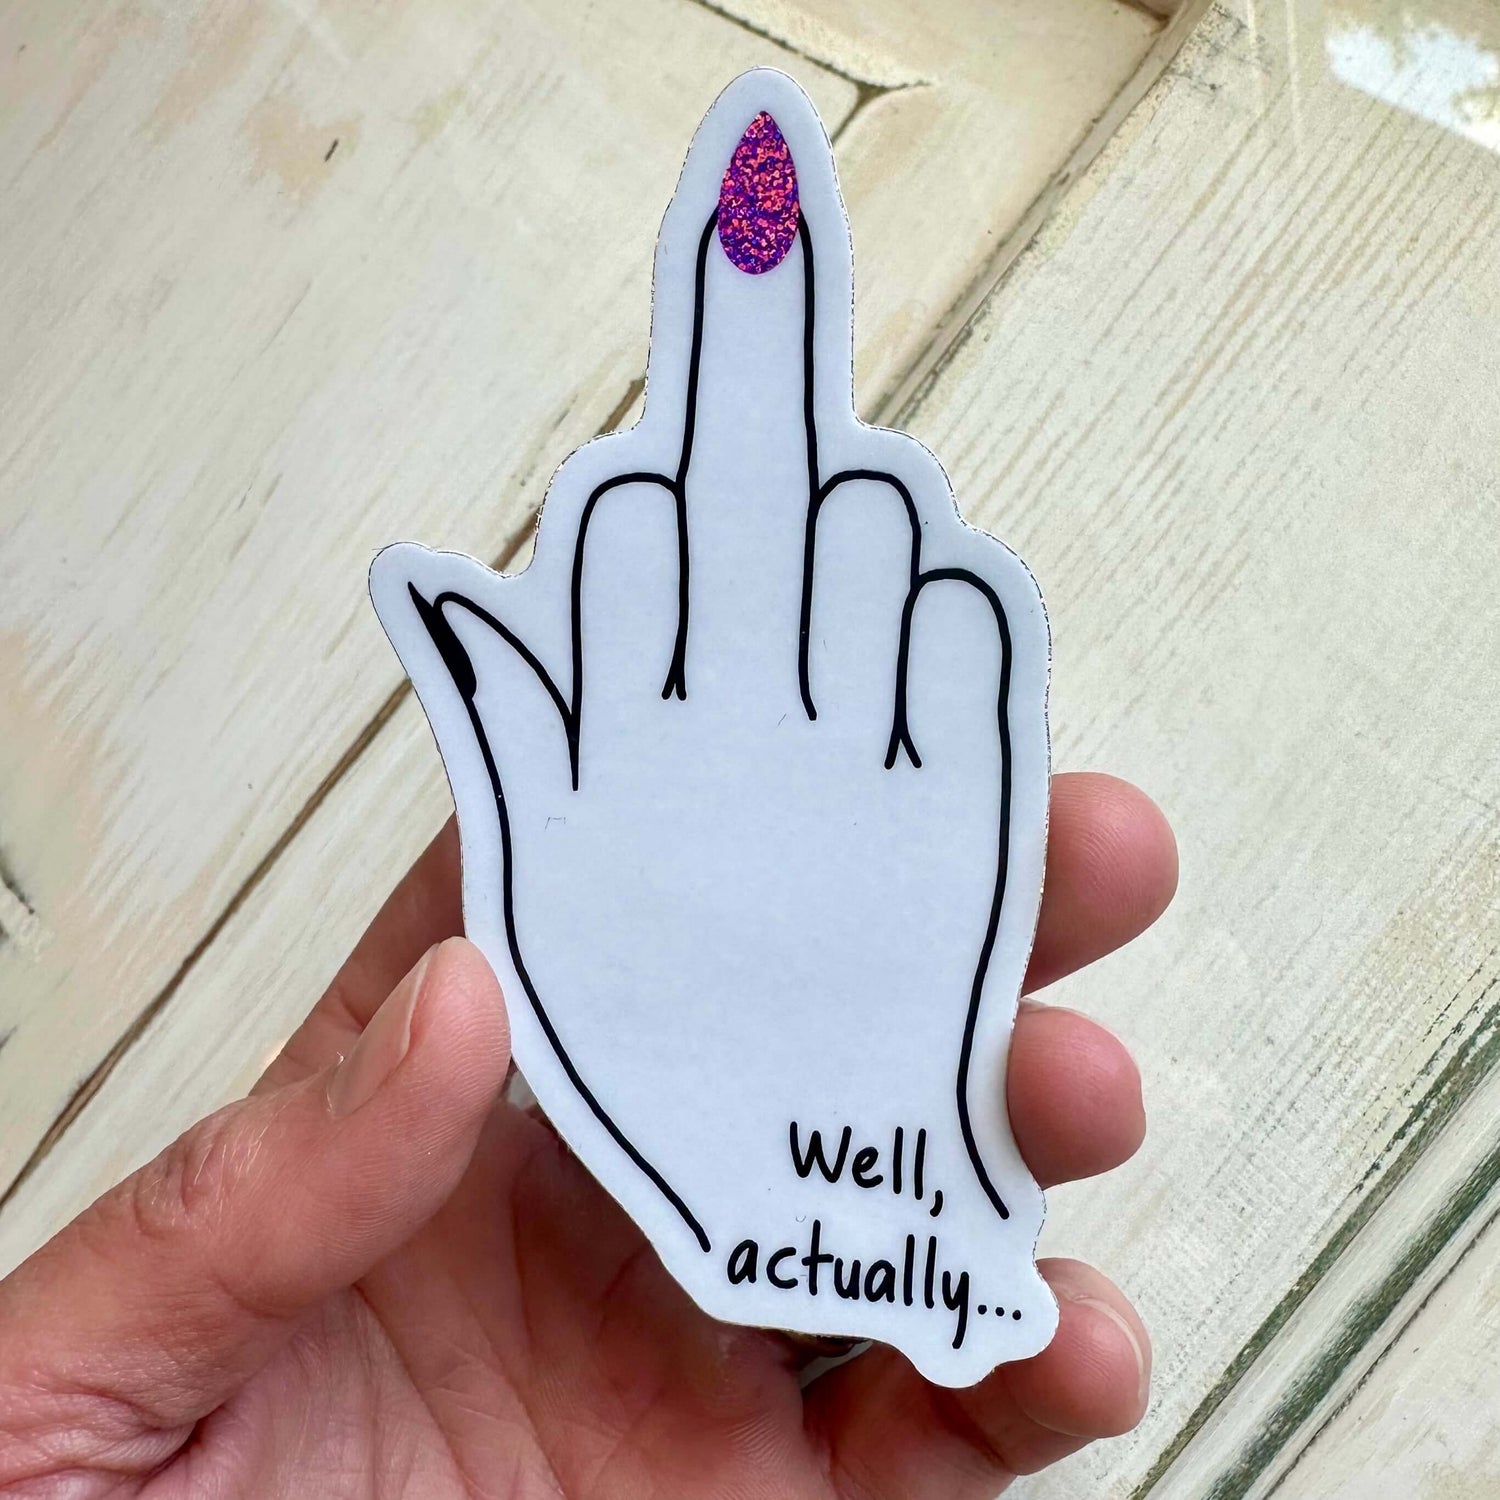 Vinyl middle finger sticker with sparkly nail with words, "Well, actually..."